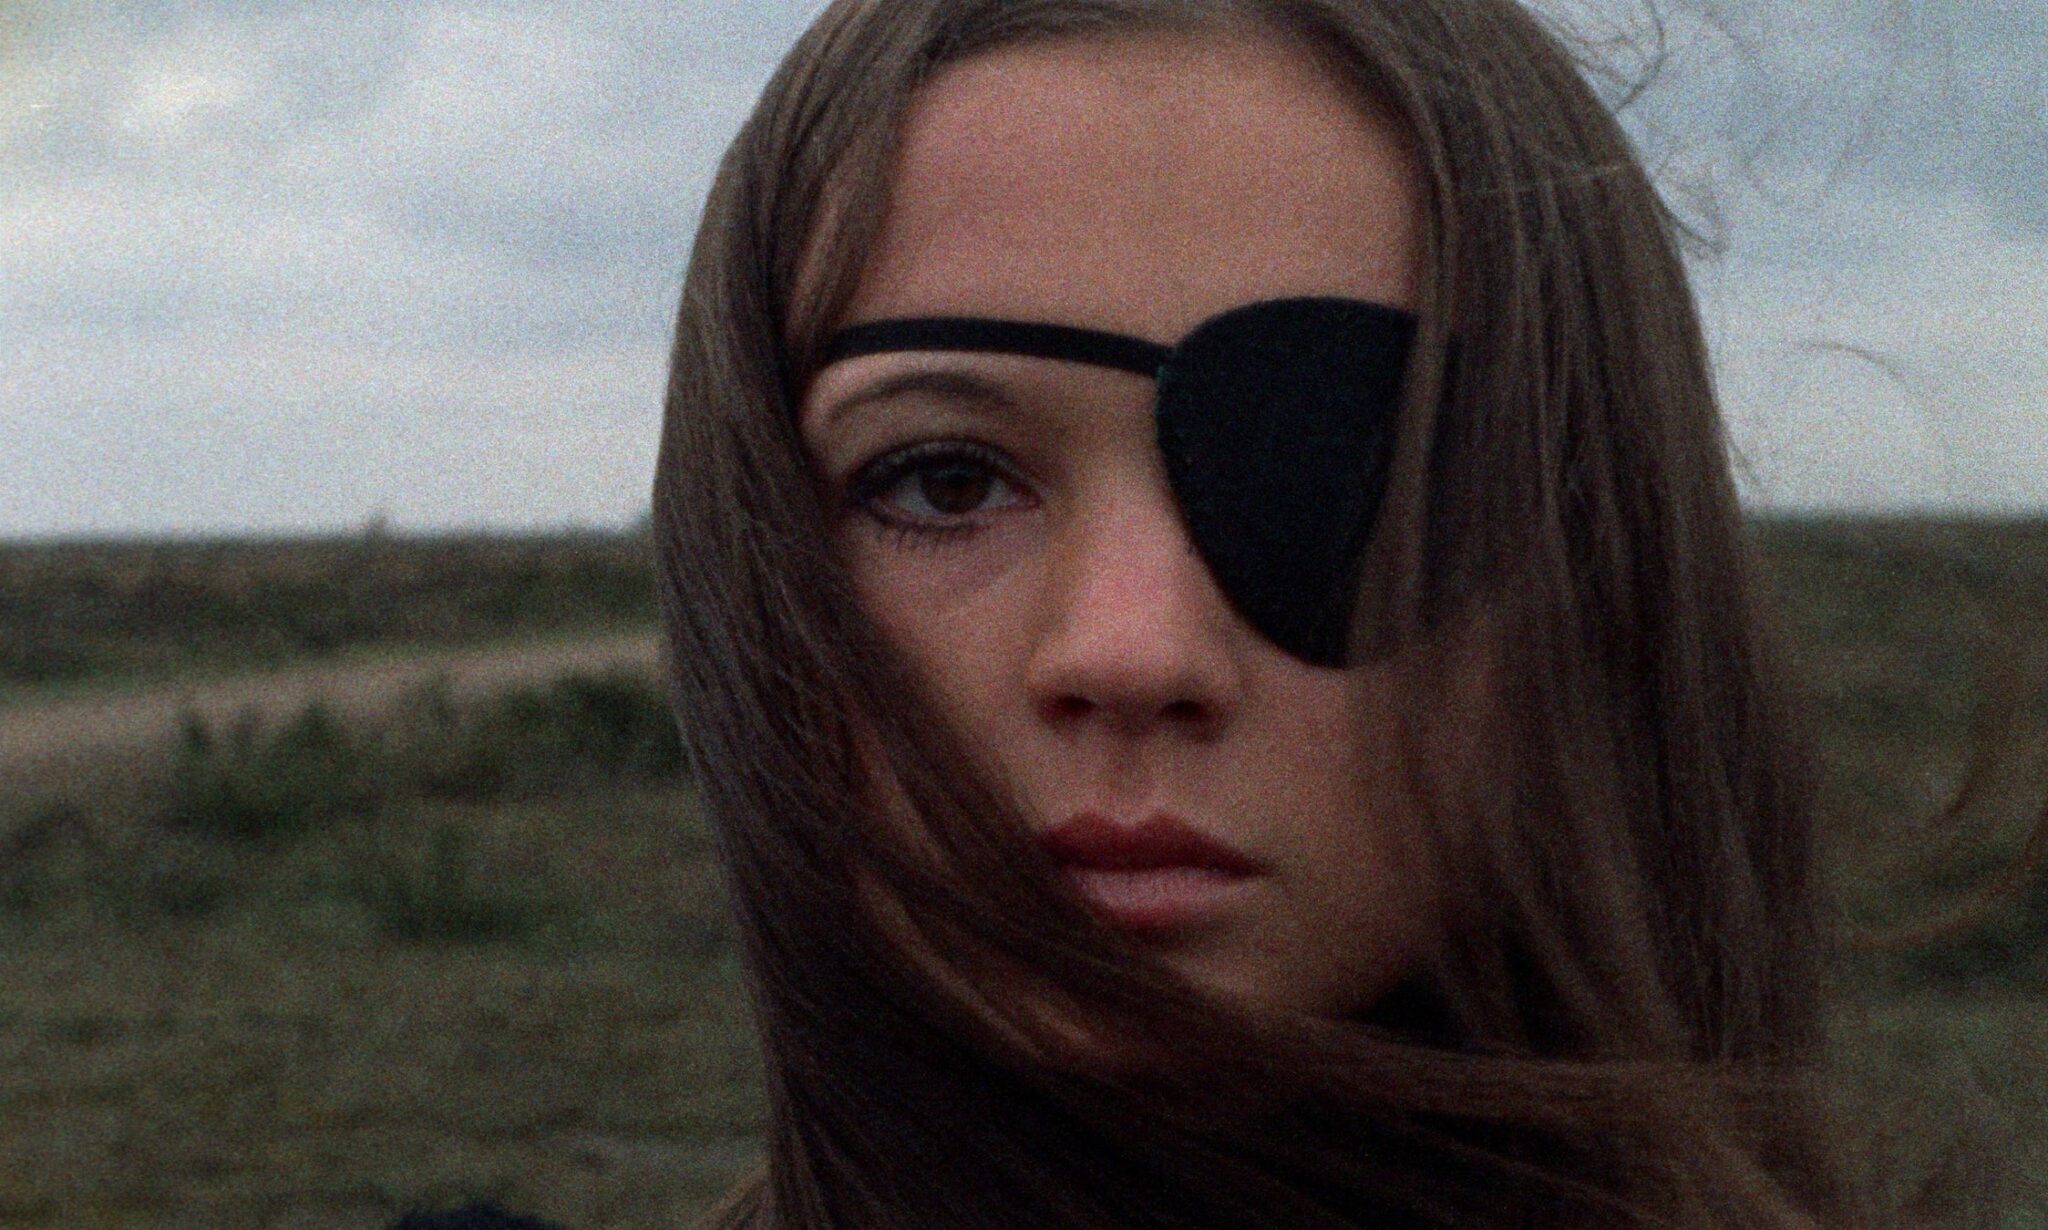 “The Most Commercial Film Ever Made”: Bo Arne Vibenius’ ‘Thriller – A Cruel Picture’ (1973)